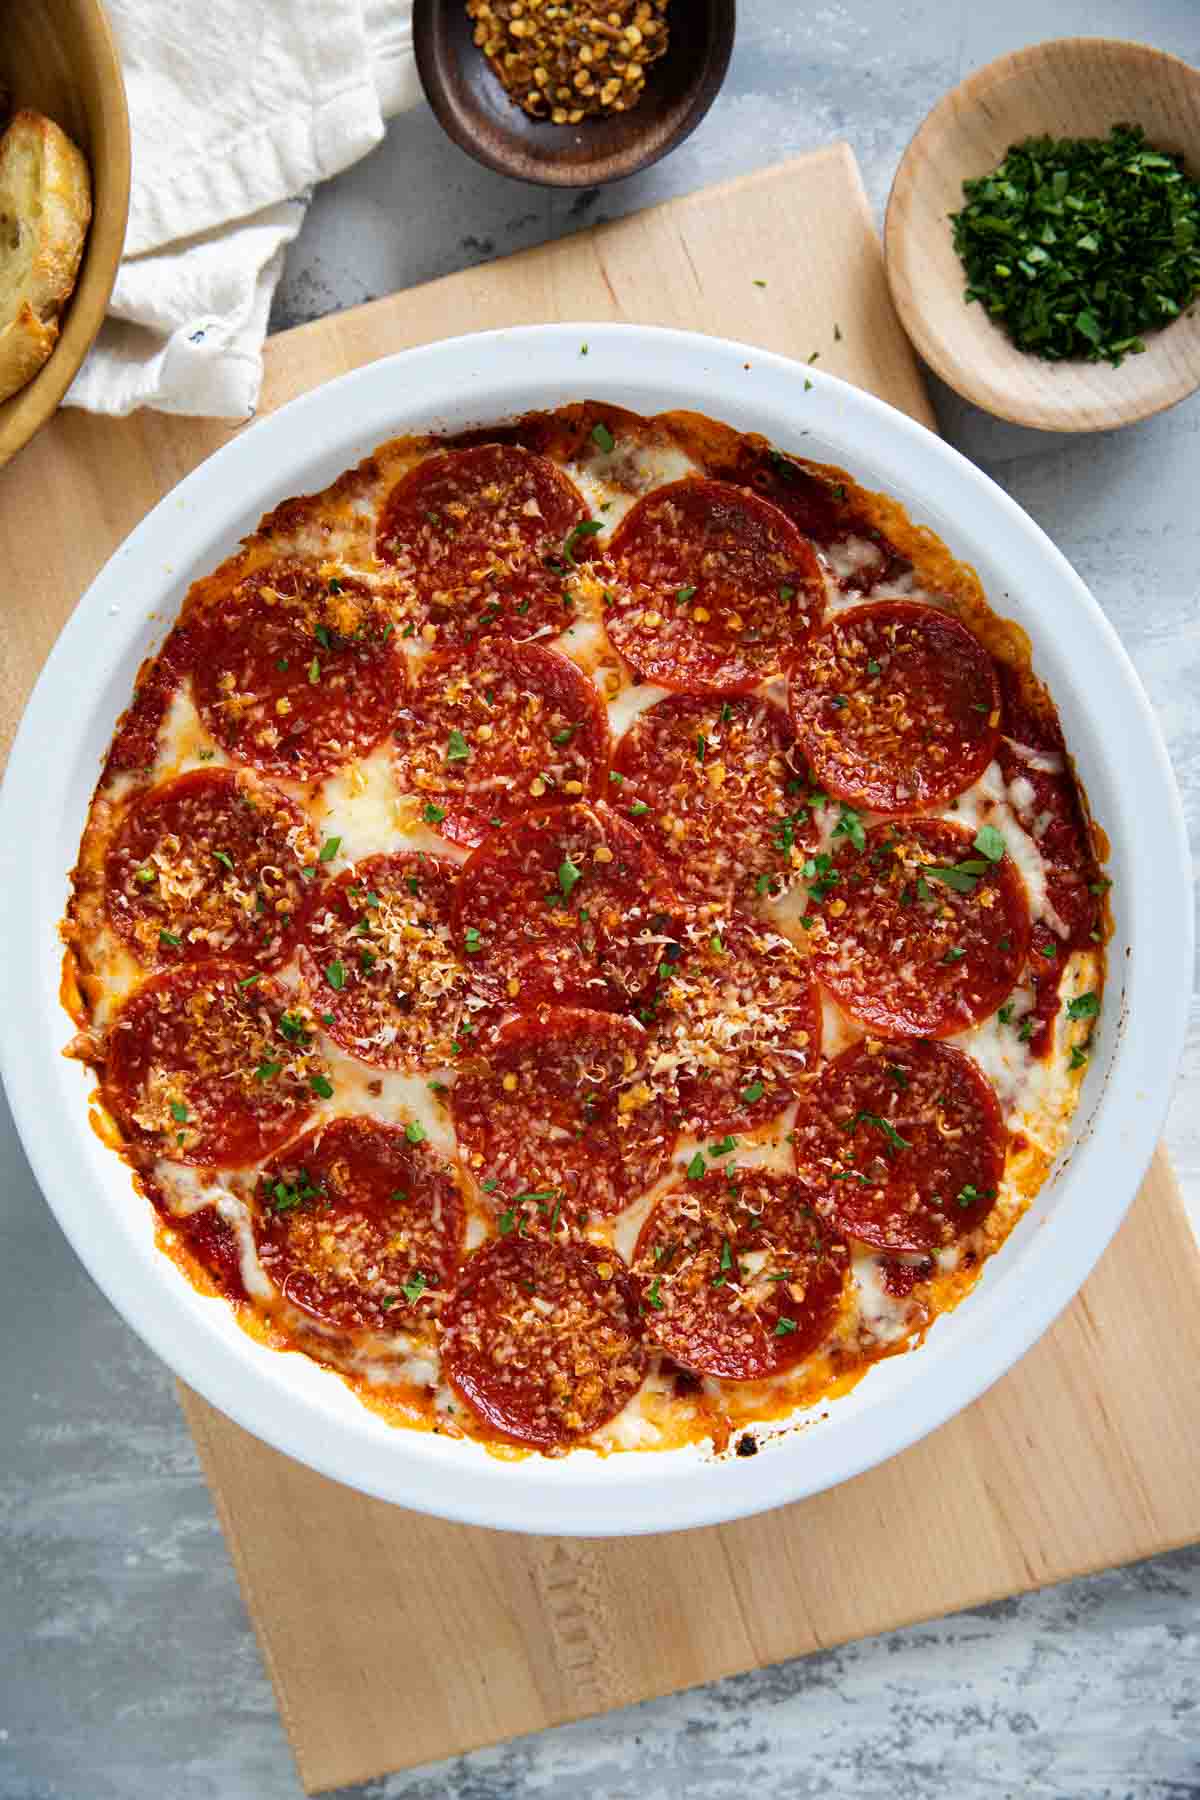 Pepperoni Pizza Dip topped with red pepper flakes and parsley.